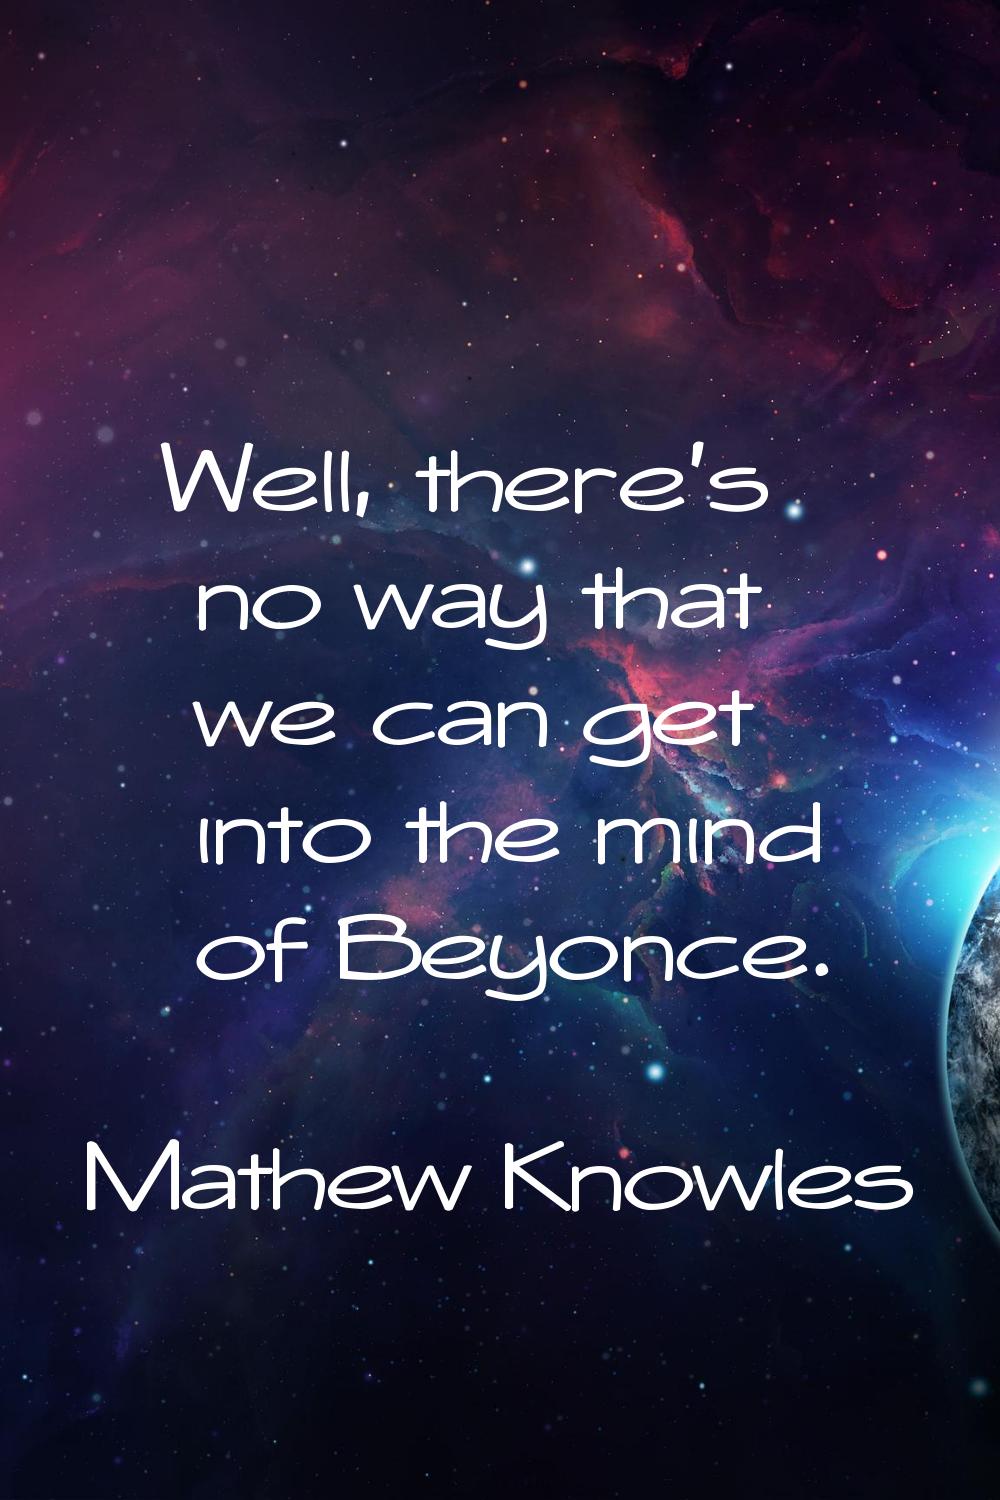 Well, there's no way that we can get into the mind of Beyonce.